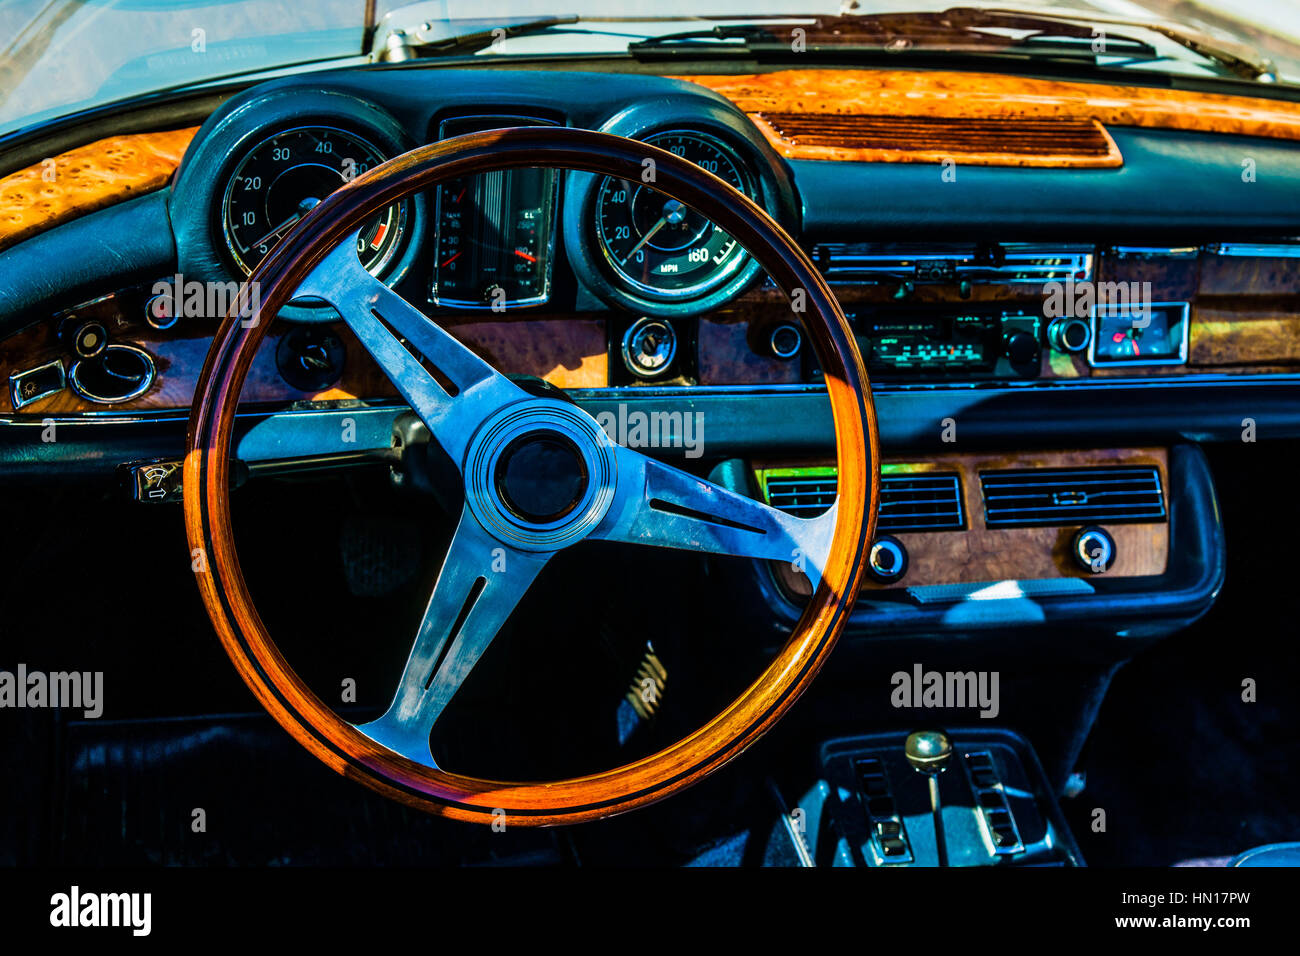 Color and beauty of vintage cars. Steering wheel and a dushboard of a vintage luxury European car. Orange and dark blue colors. Stock Photo